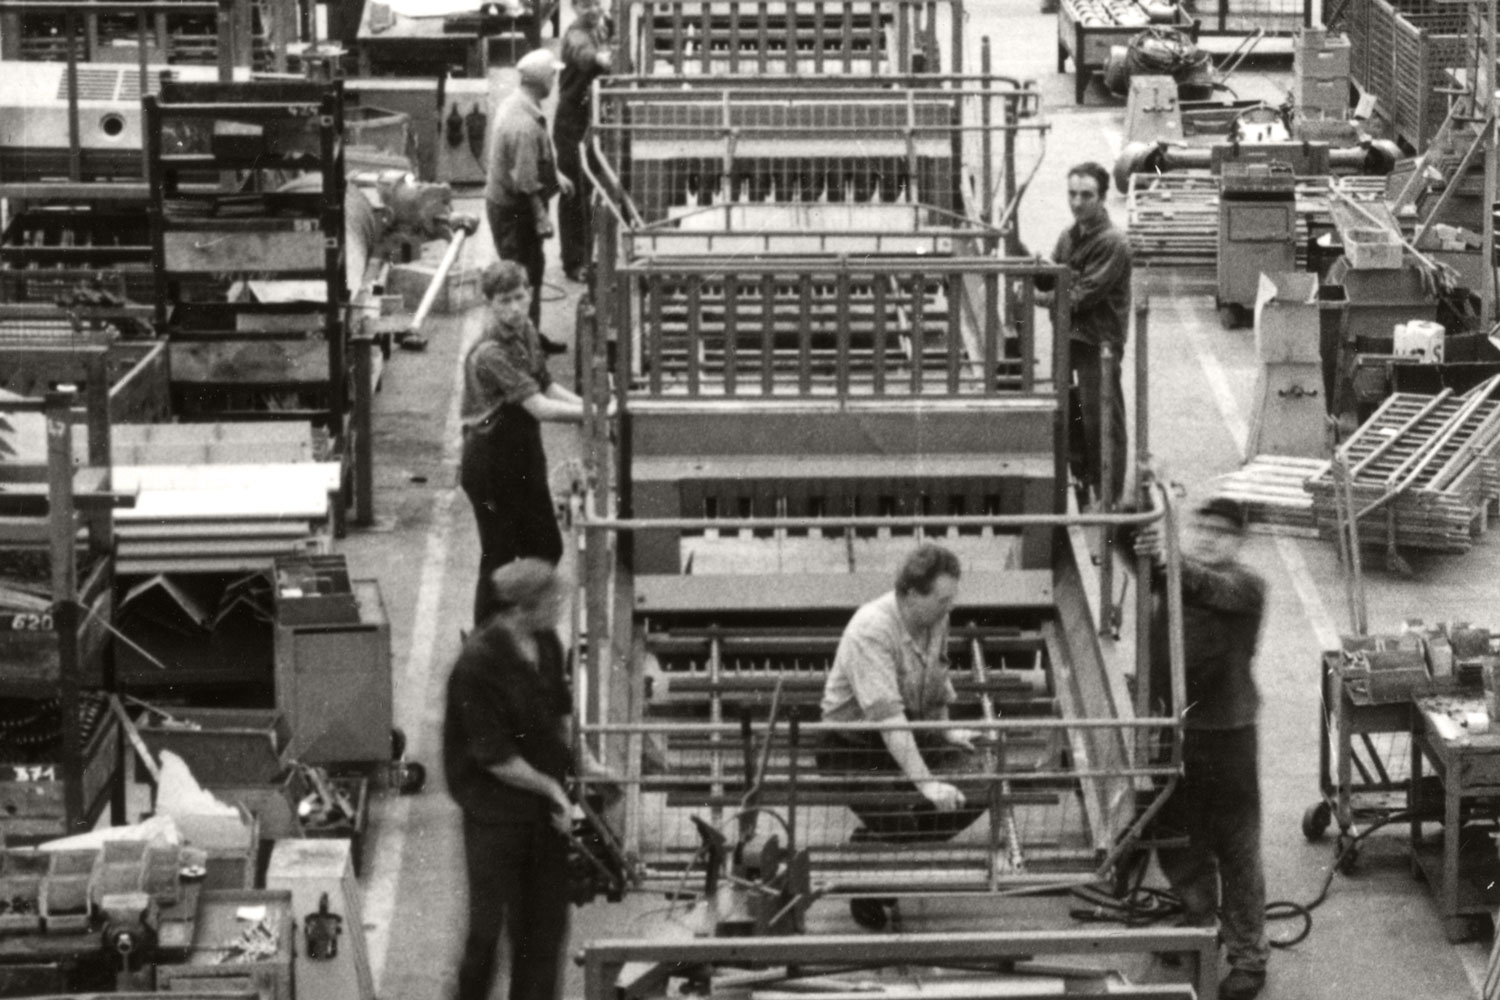 Heading for the exit: Loader wagons on the assembly line.